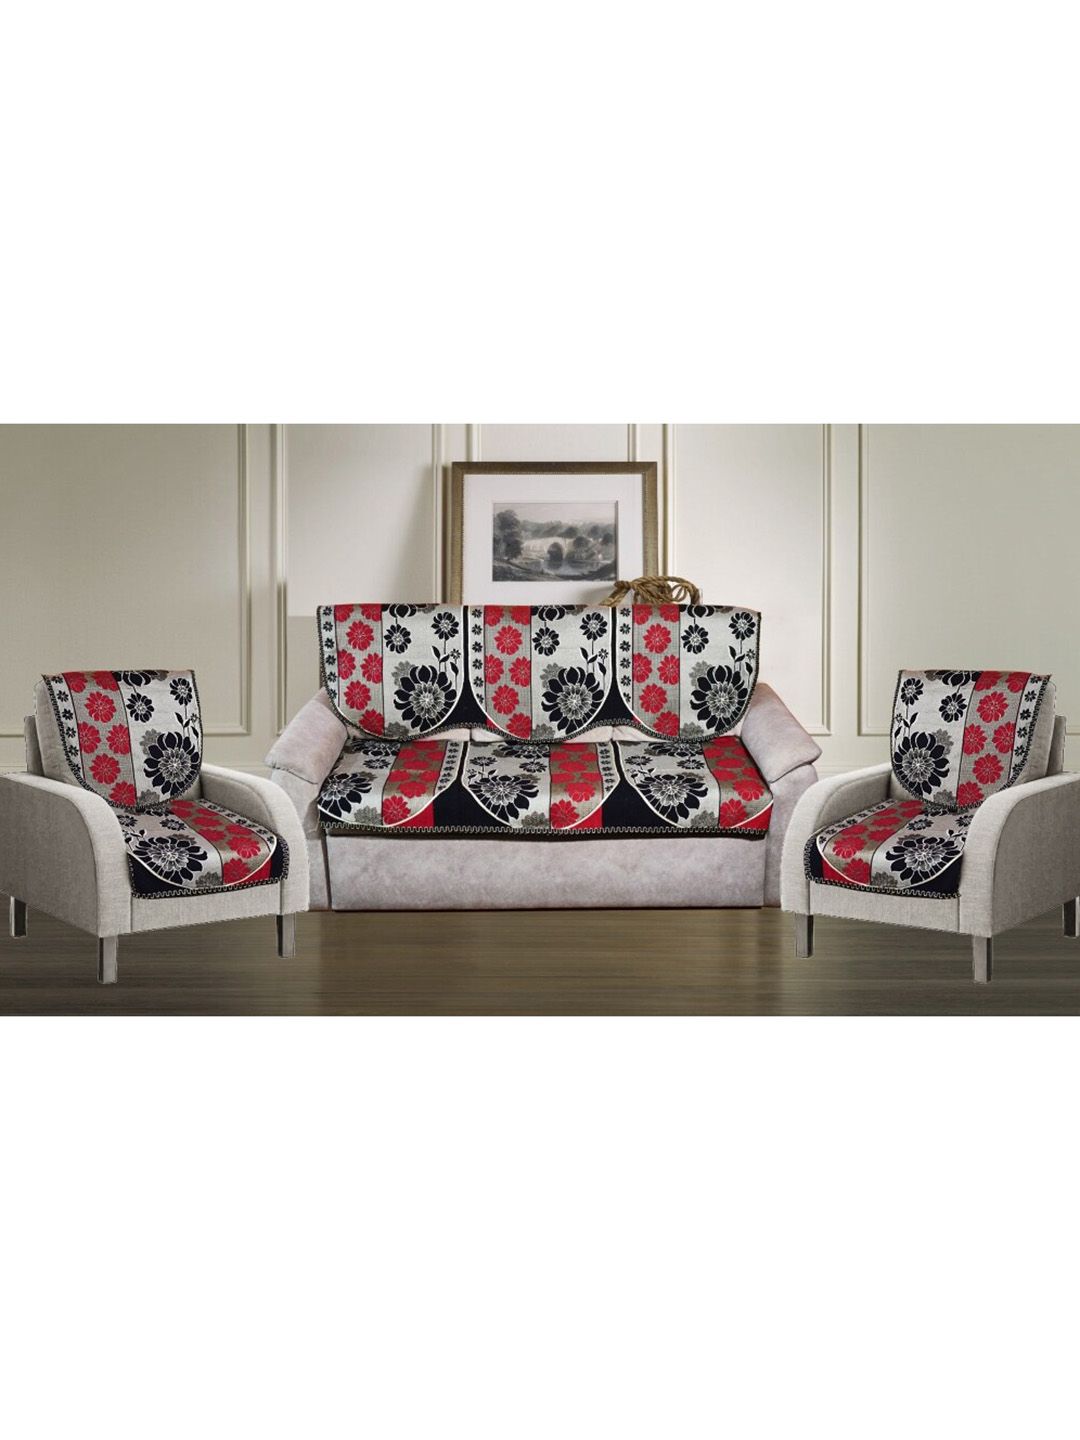 GRIIHAM Grey & Red Floral Pack of 5 Seater Sofa Cover Price in India